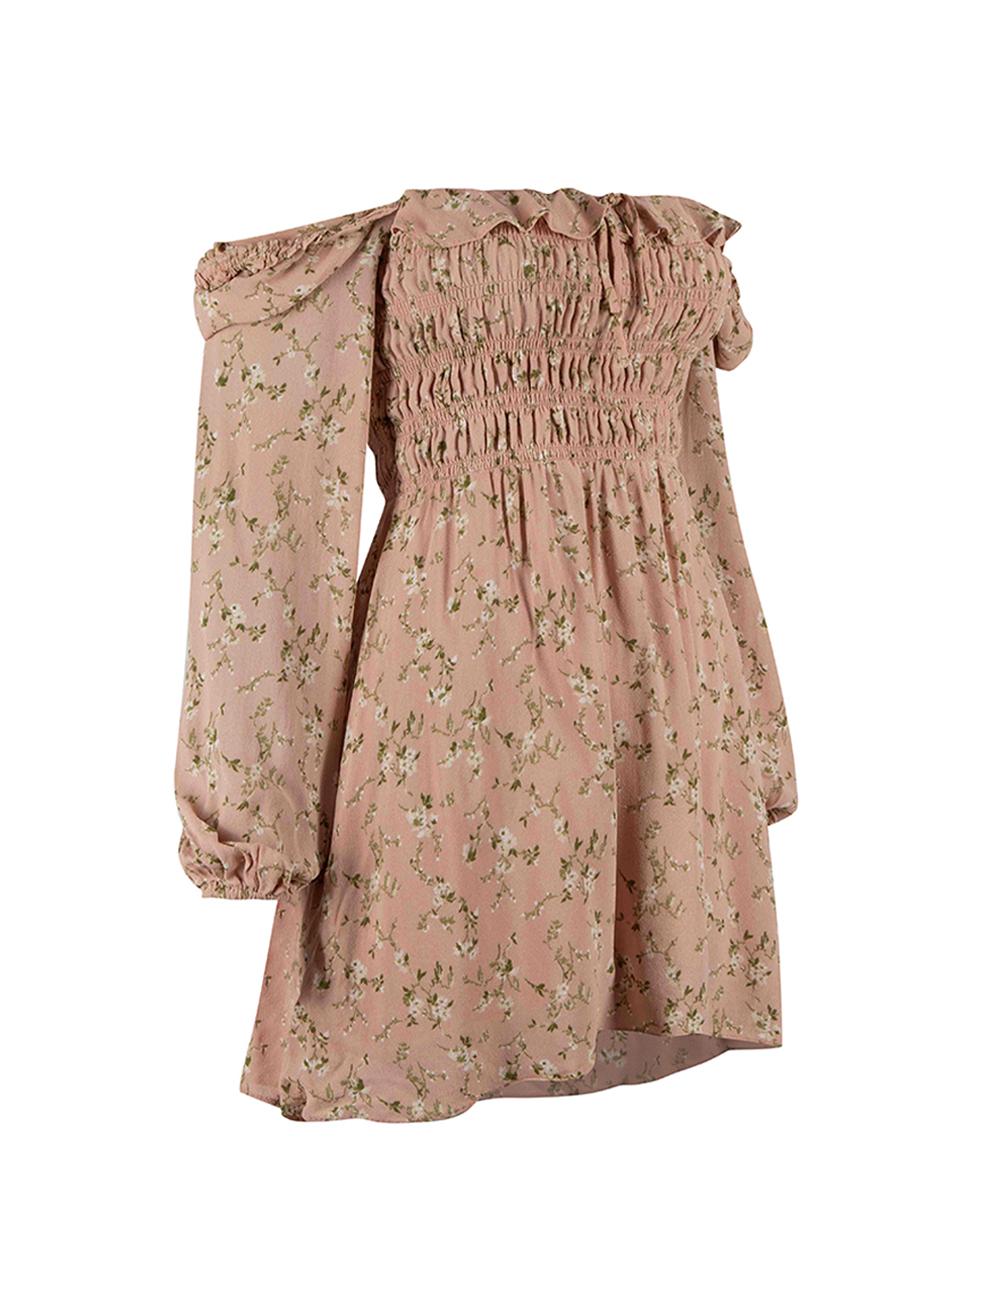 CONDITION is Very good. Hardly any visible wear to dress is evident on this used Reformation designer resale item. 



Details


Pink

Viscose

Mini dress

Floral print pattern

Square neckline with ruffles and bow detail

Elastic shirred